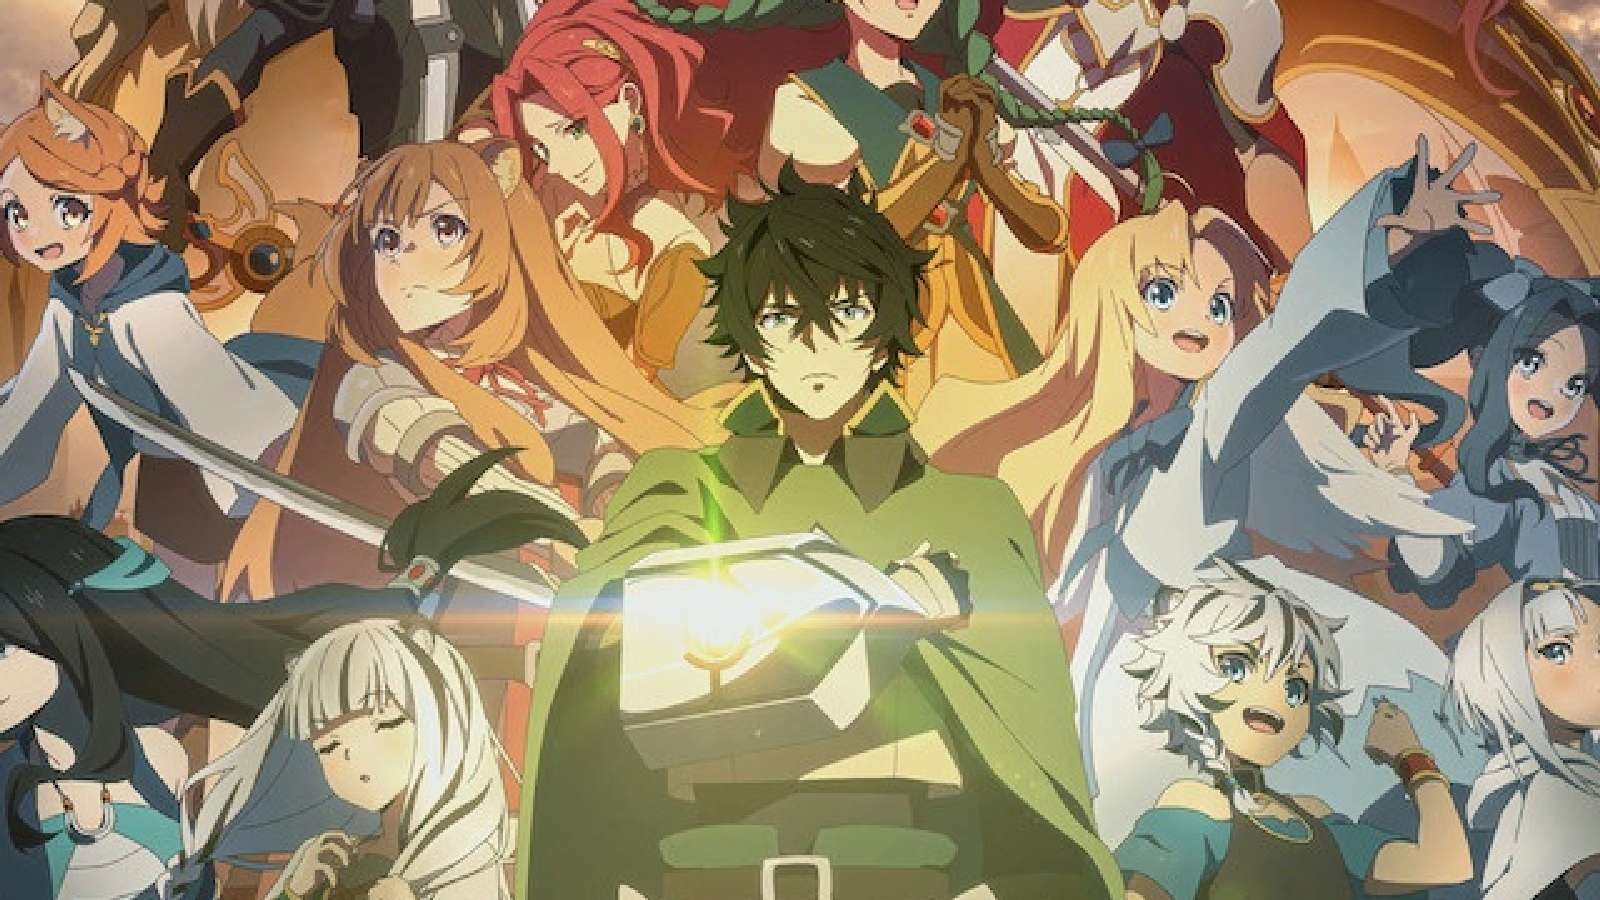 Naofumi and friends in Rising of the Shield Hero.